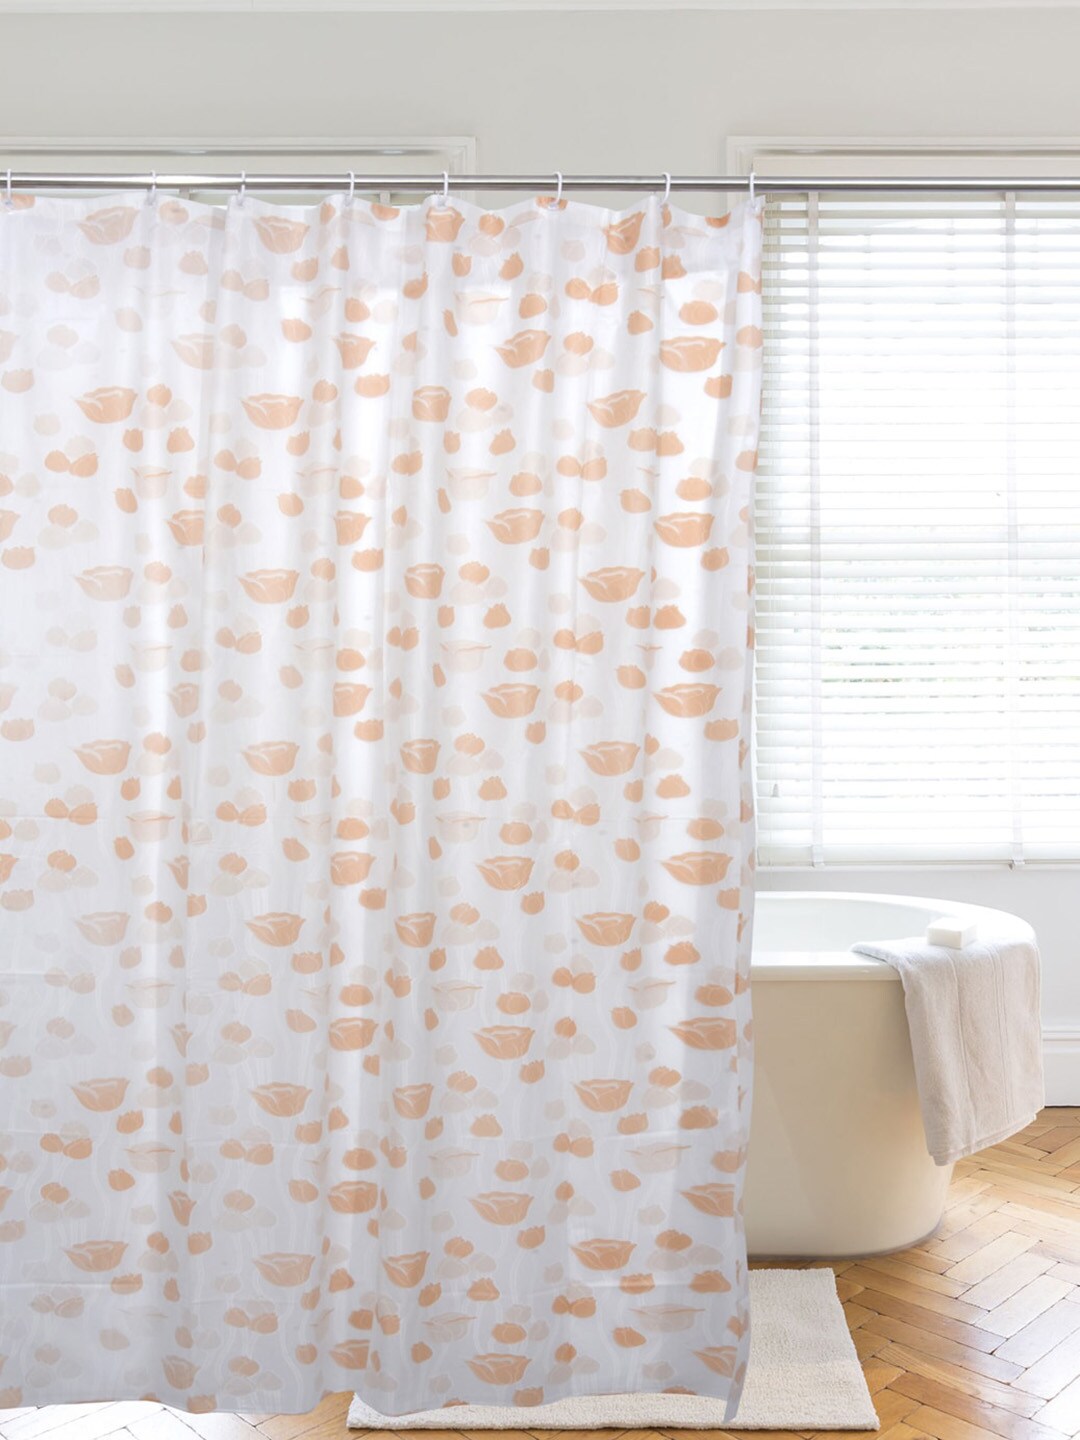 Clasiko Peach & White Printed PVC Plastic Shower Curtain With Hooks Price in India